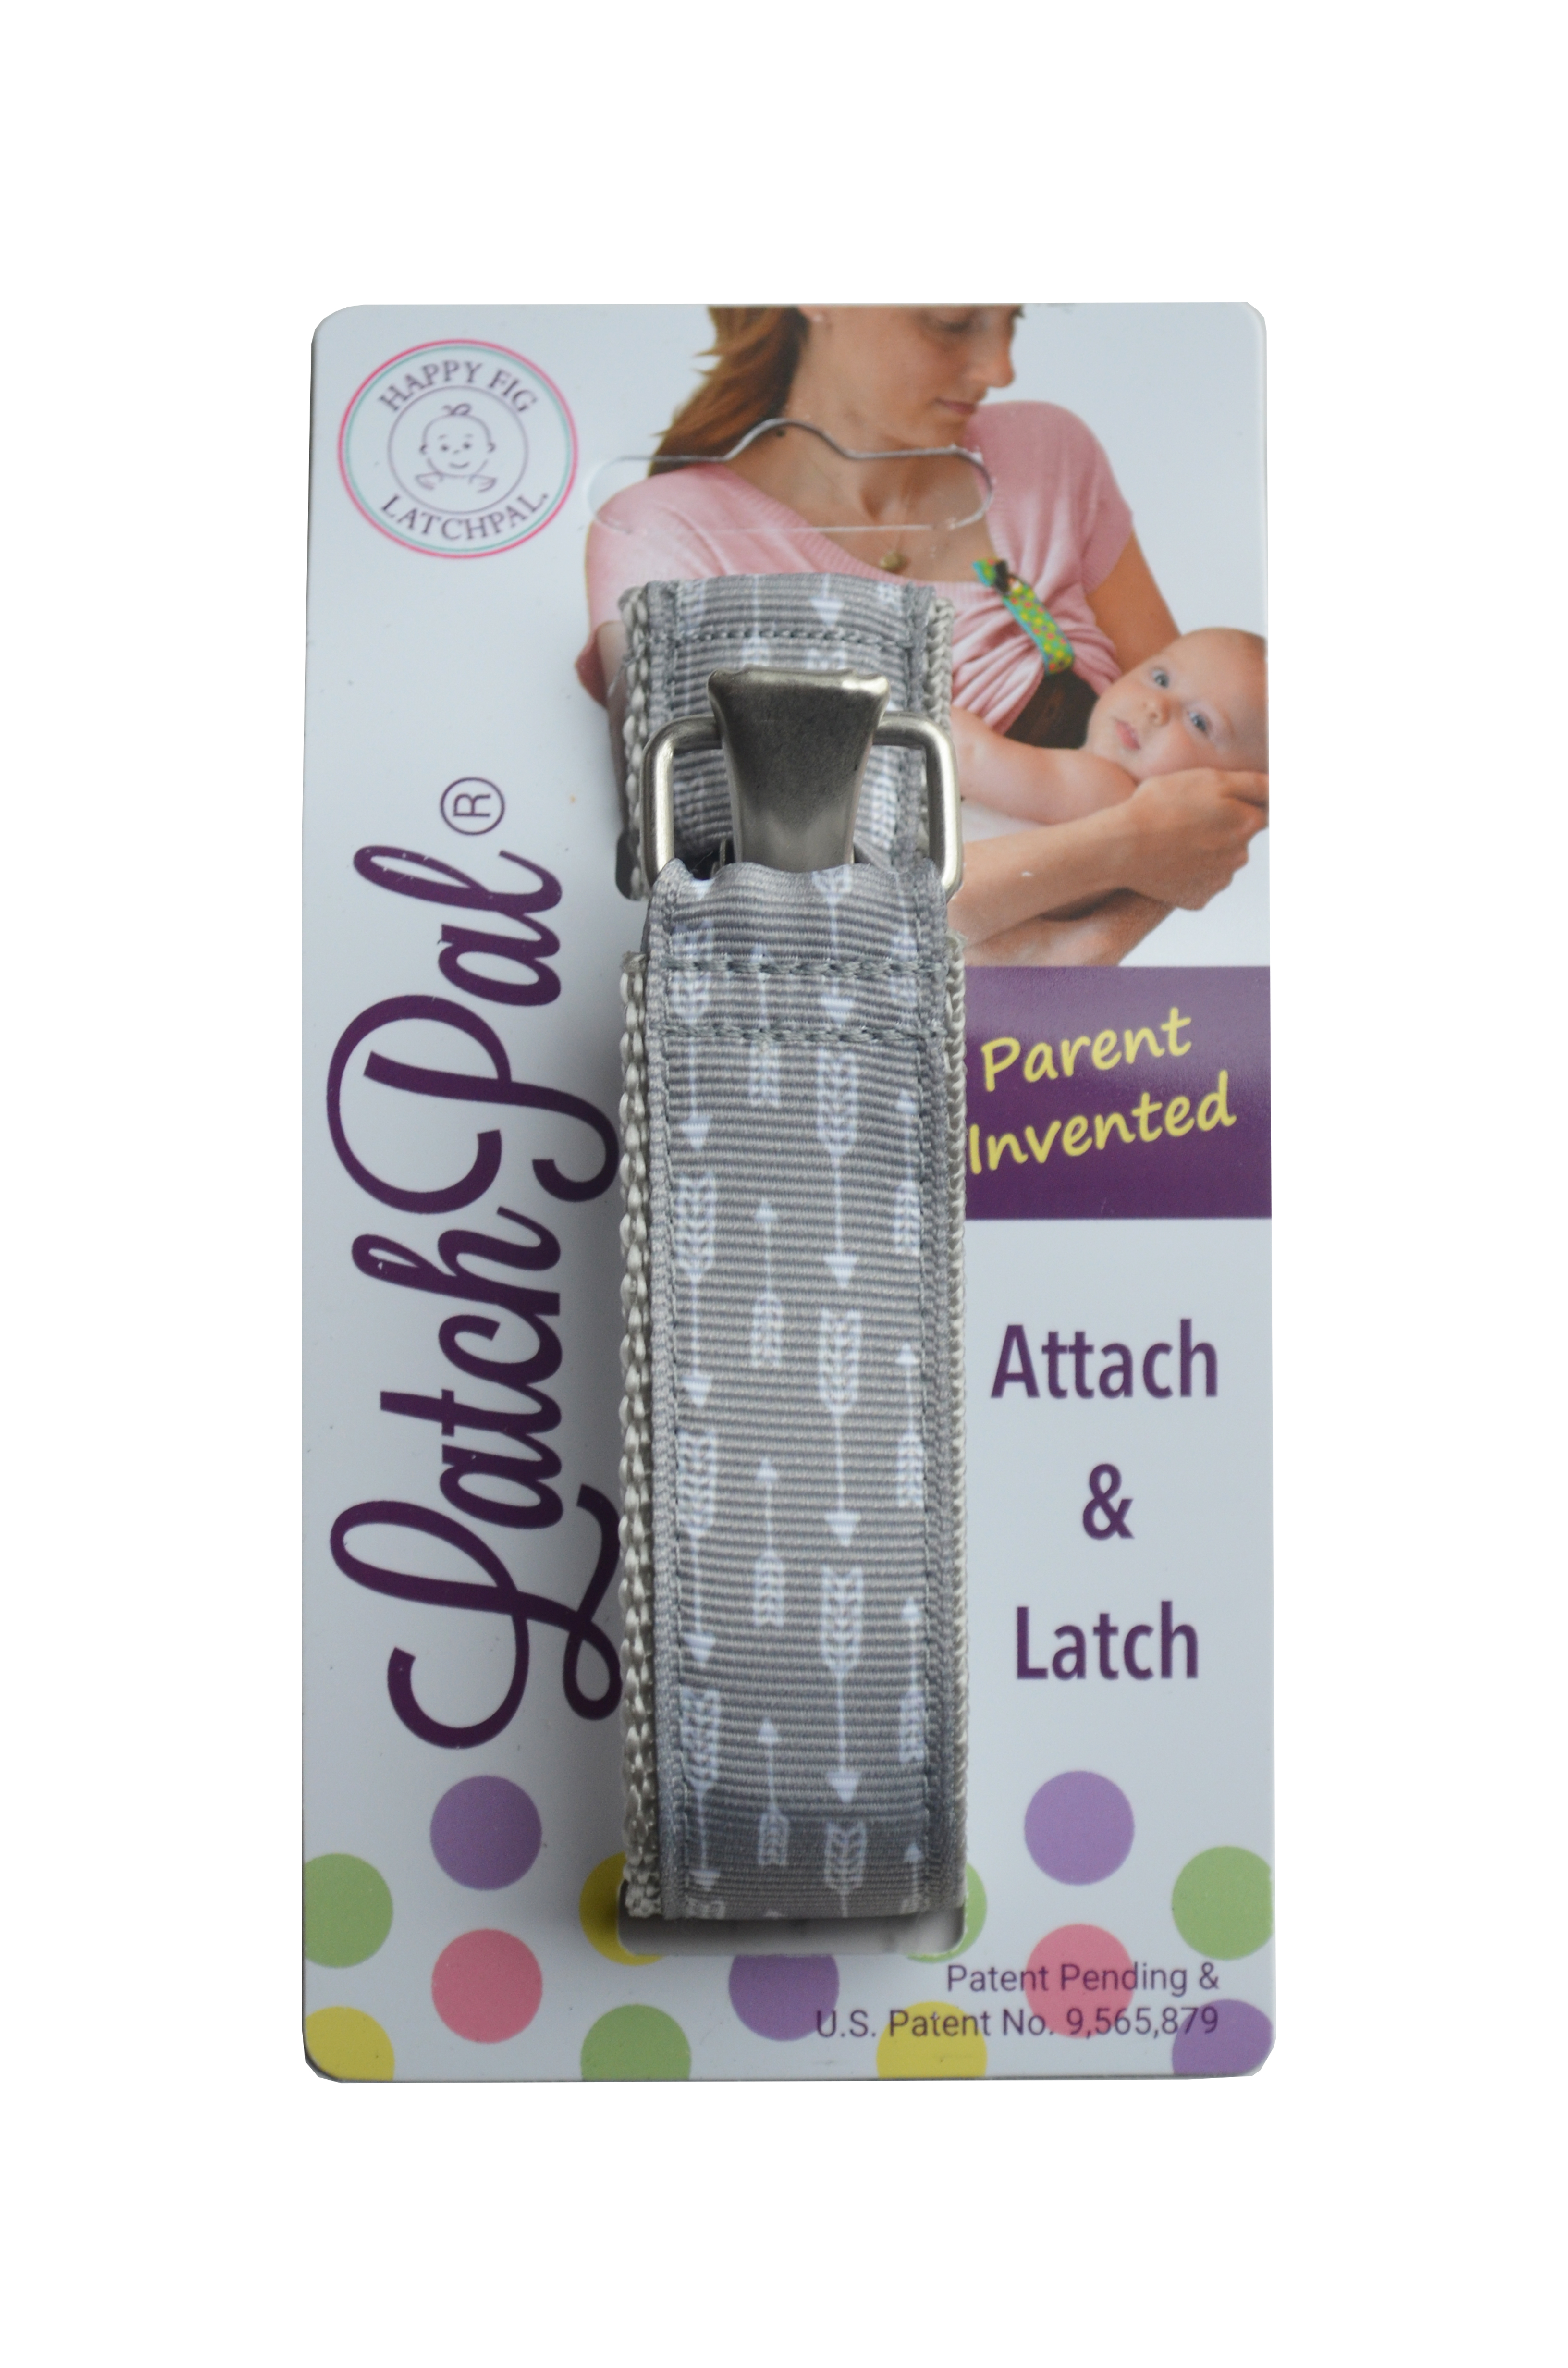 Floral LatchPal Hands-Free Nursing Clip for Breastfeeding- Simple Spring Rose Non-Slip Helpful with Nursing Cover and Breast Pump Alternative to Nursing Tops Shirt Holder Quick Fastening 